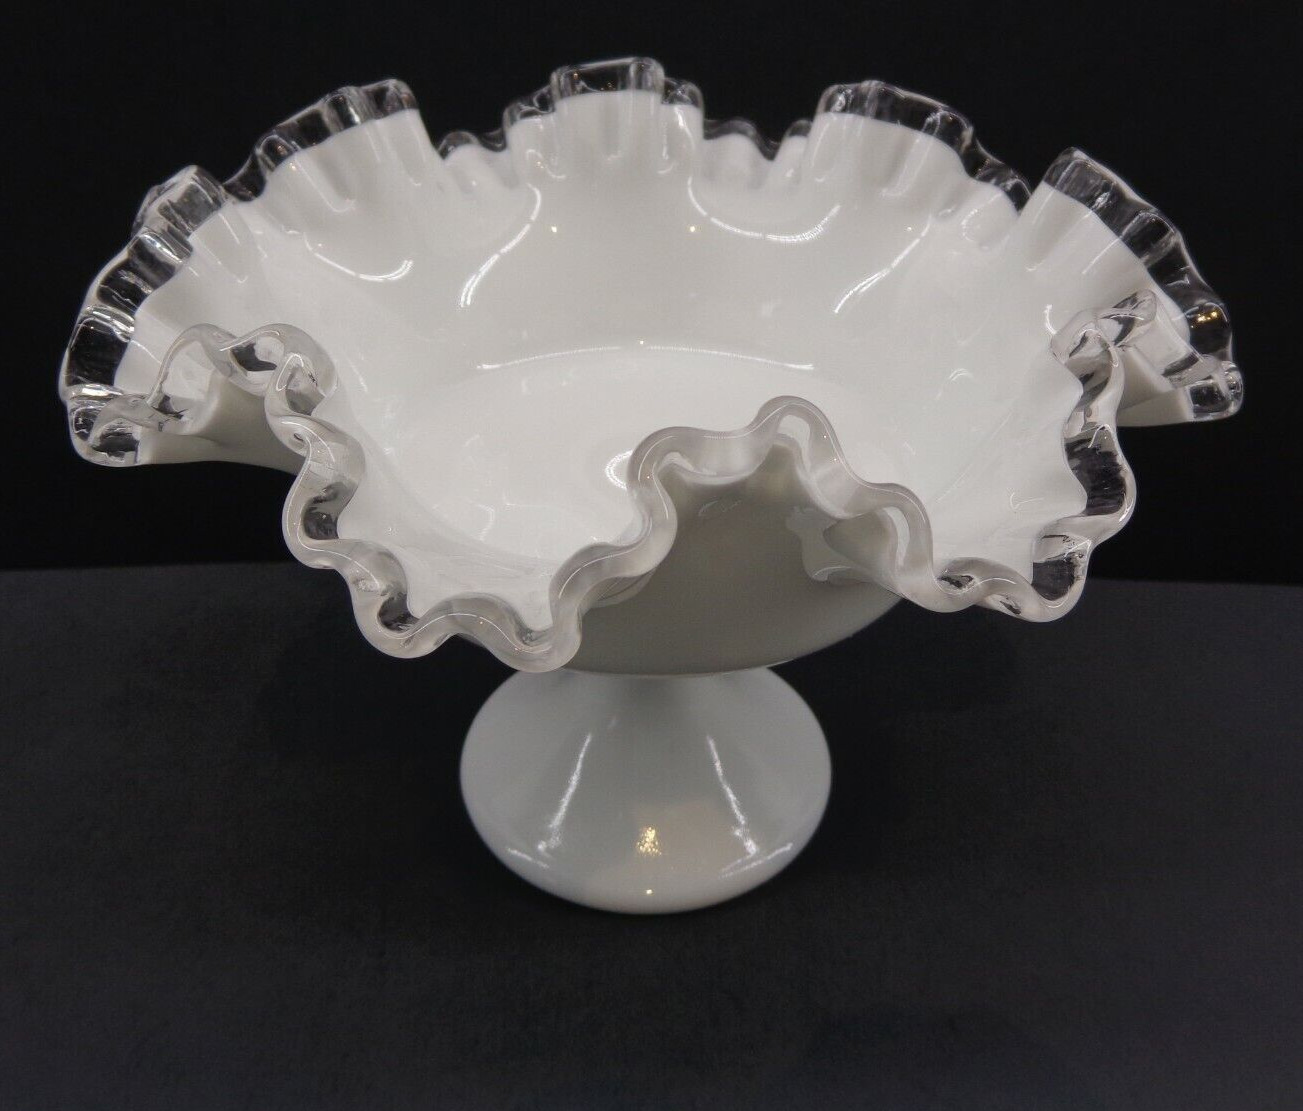 NICE~Vintage FENTON SILVER CREST Milk Glass Ruffled Pedestal CANDY DISH/COMPOTE